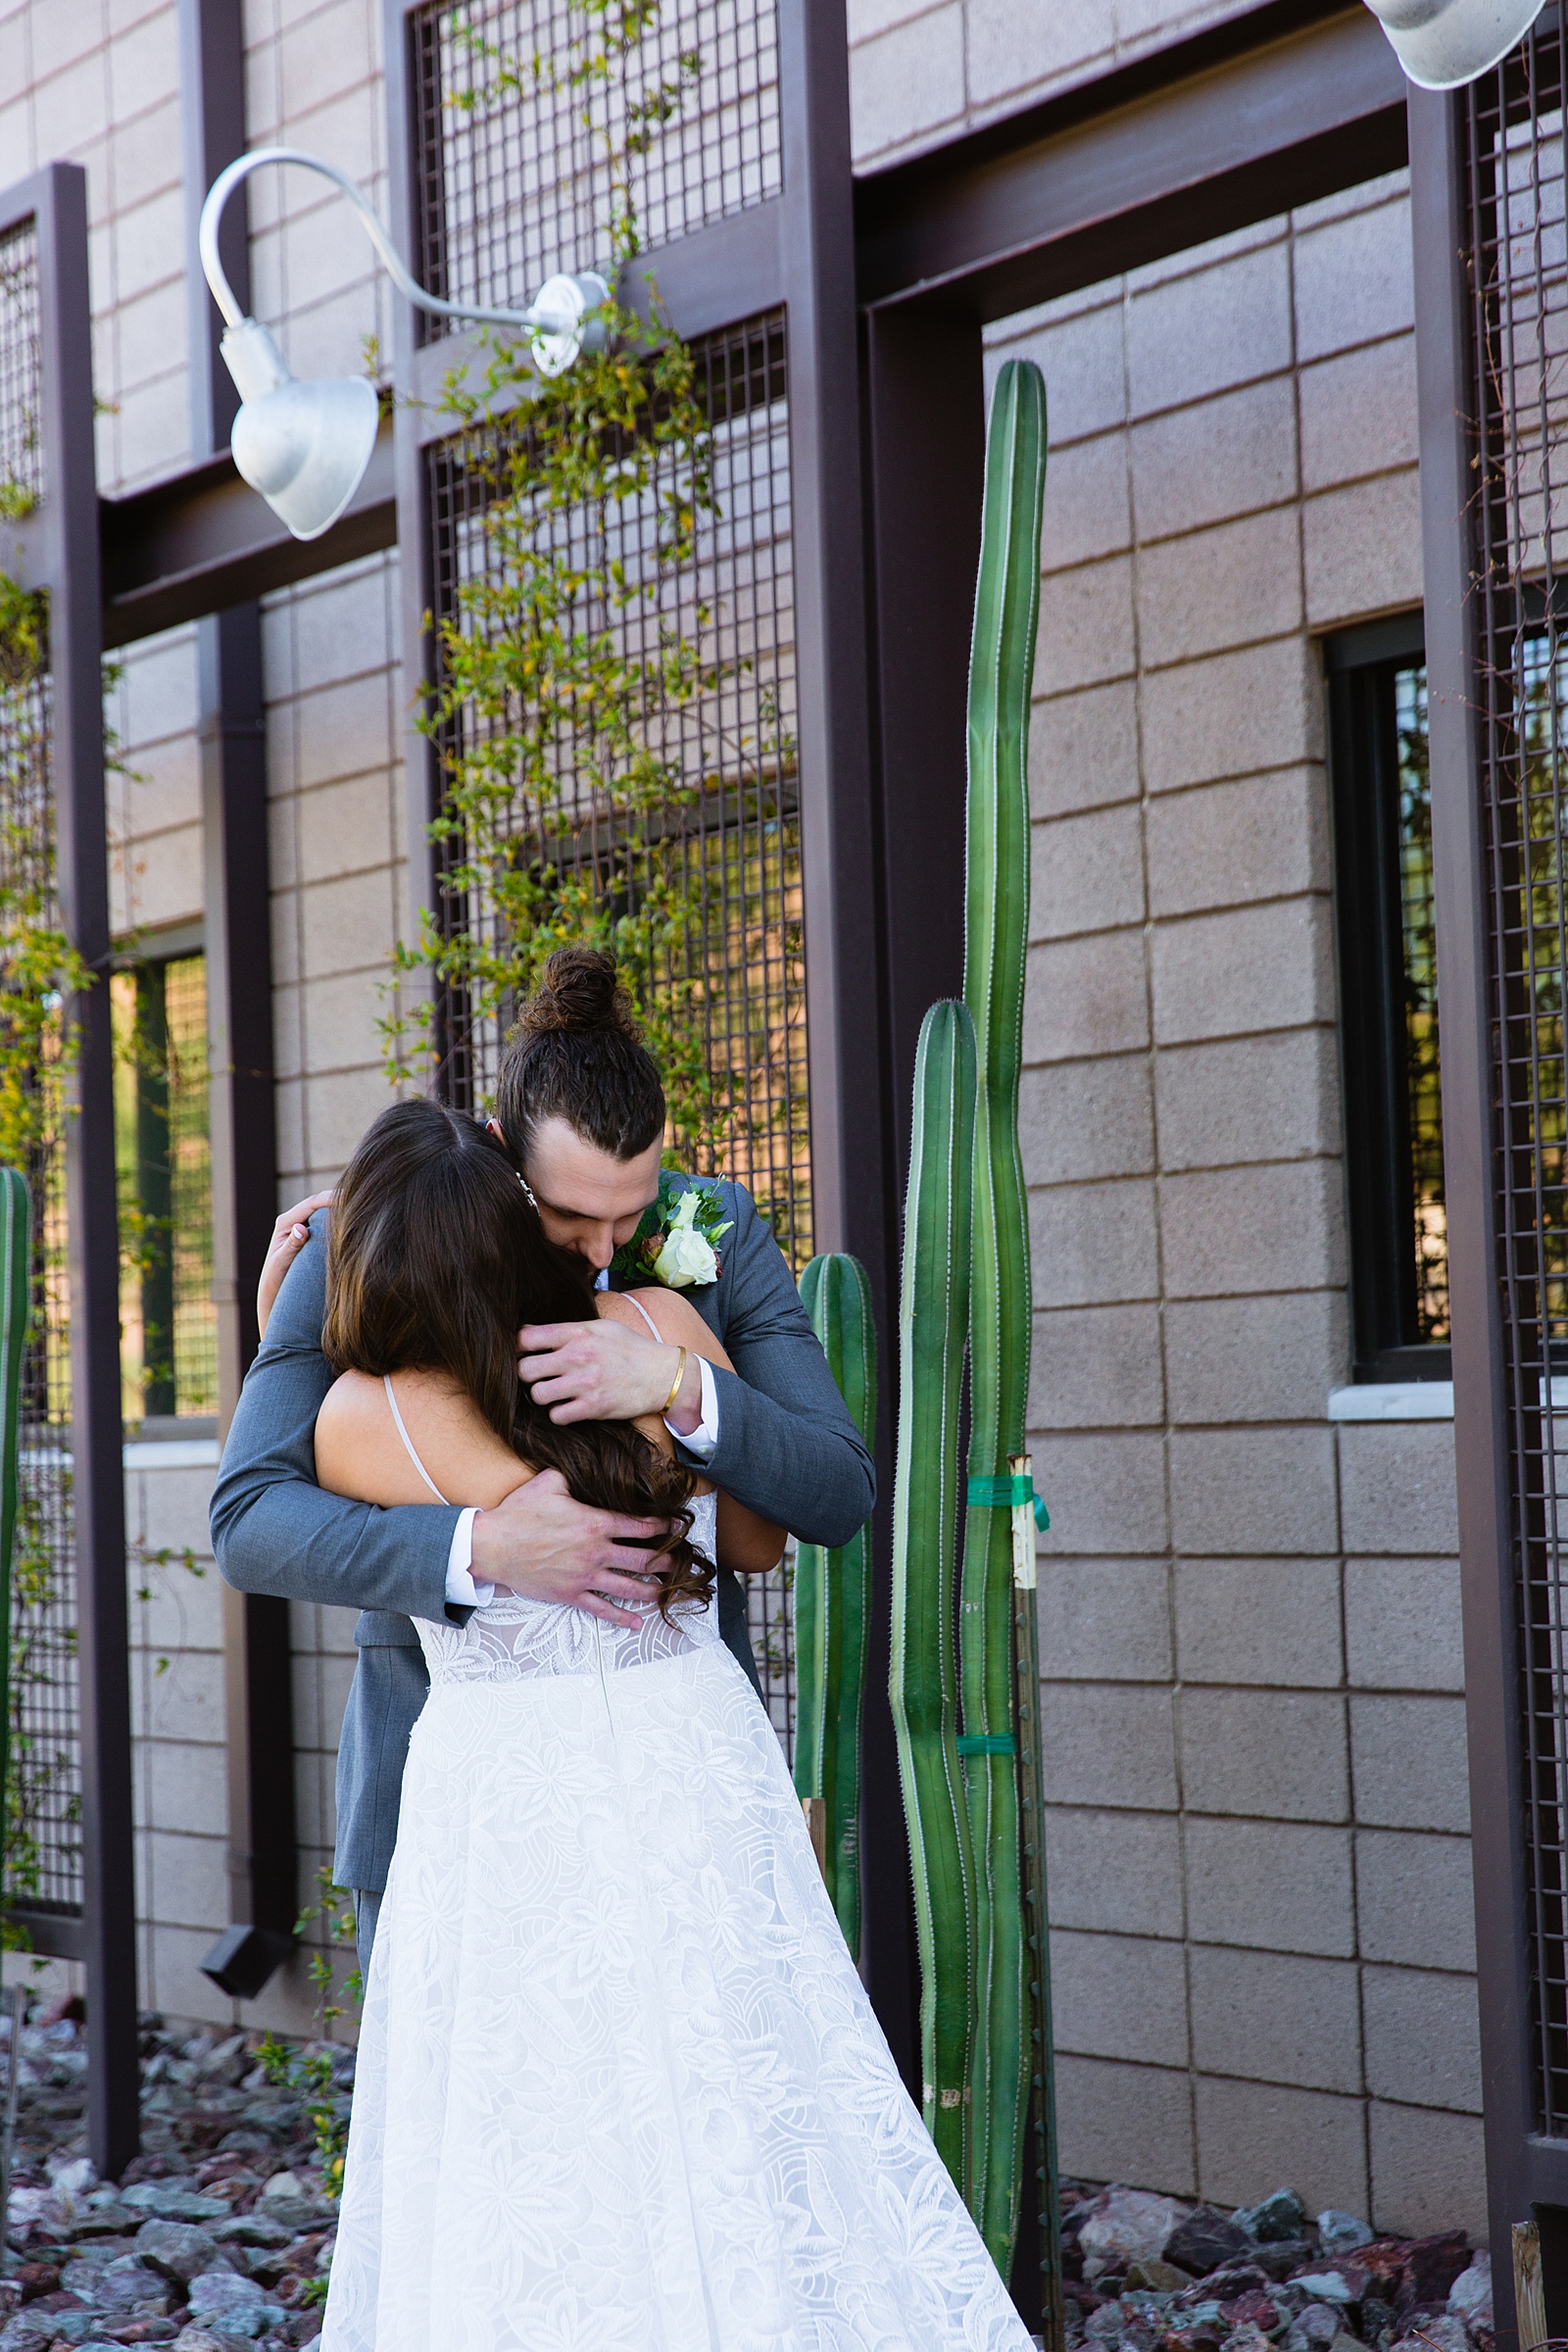 Bride and groom's first look at Papago Events by Phoenix wedding photographer PMA Photography.